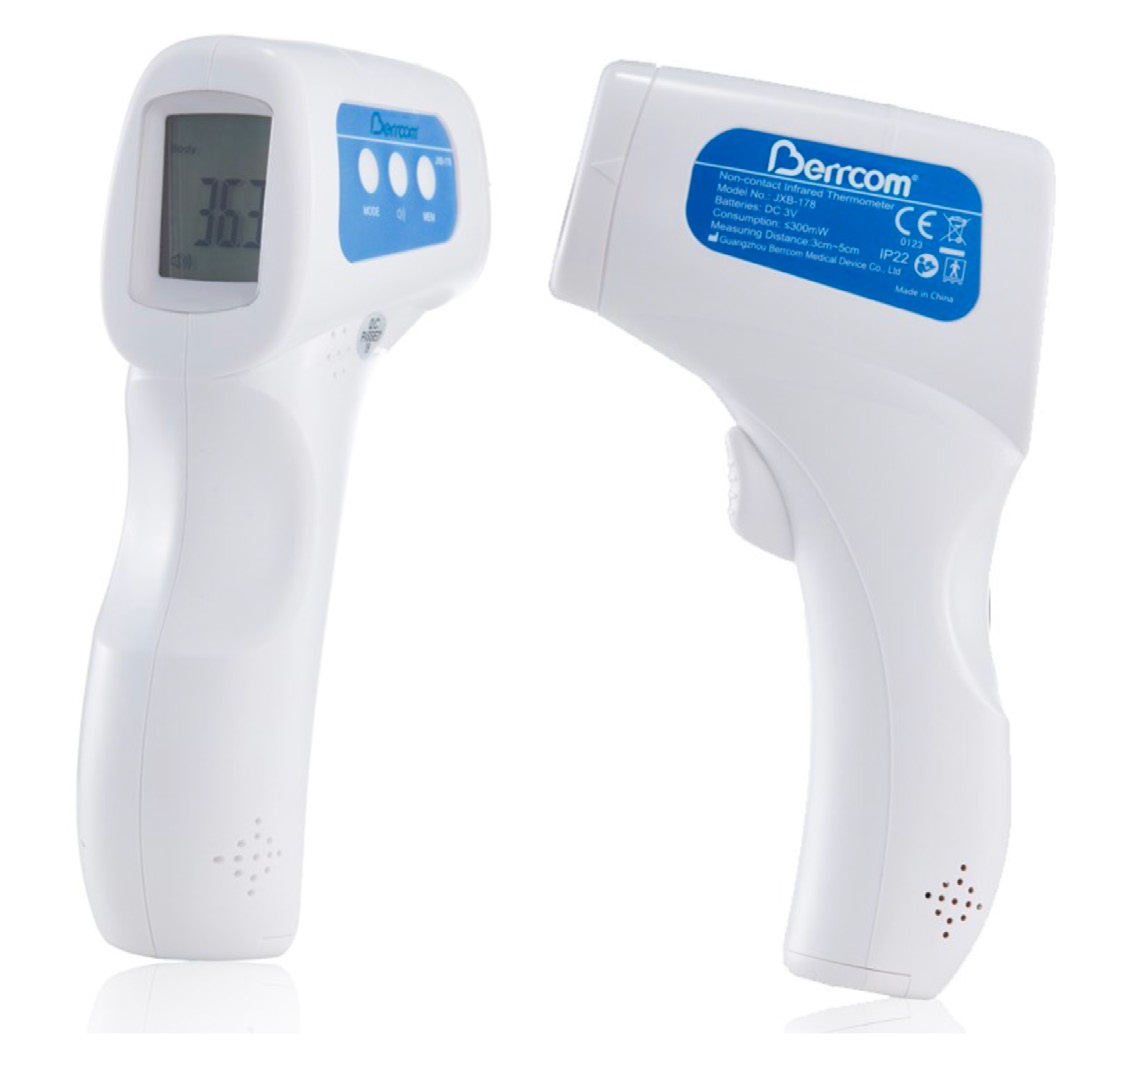 Berrcom Infrared Touchless Thermometer